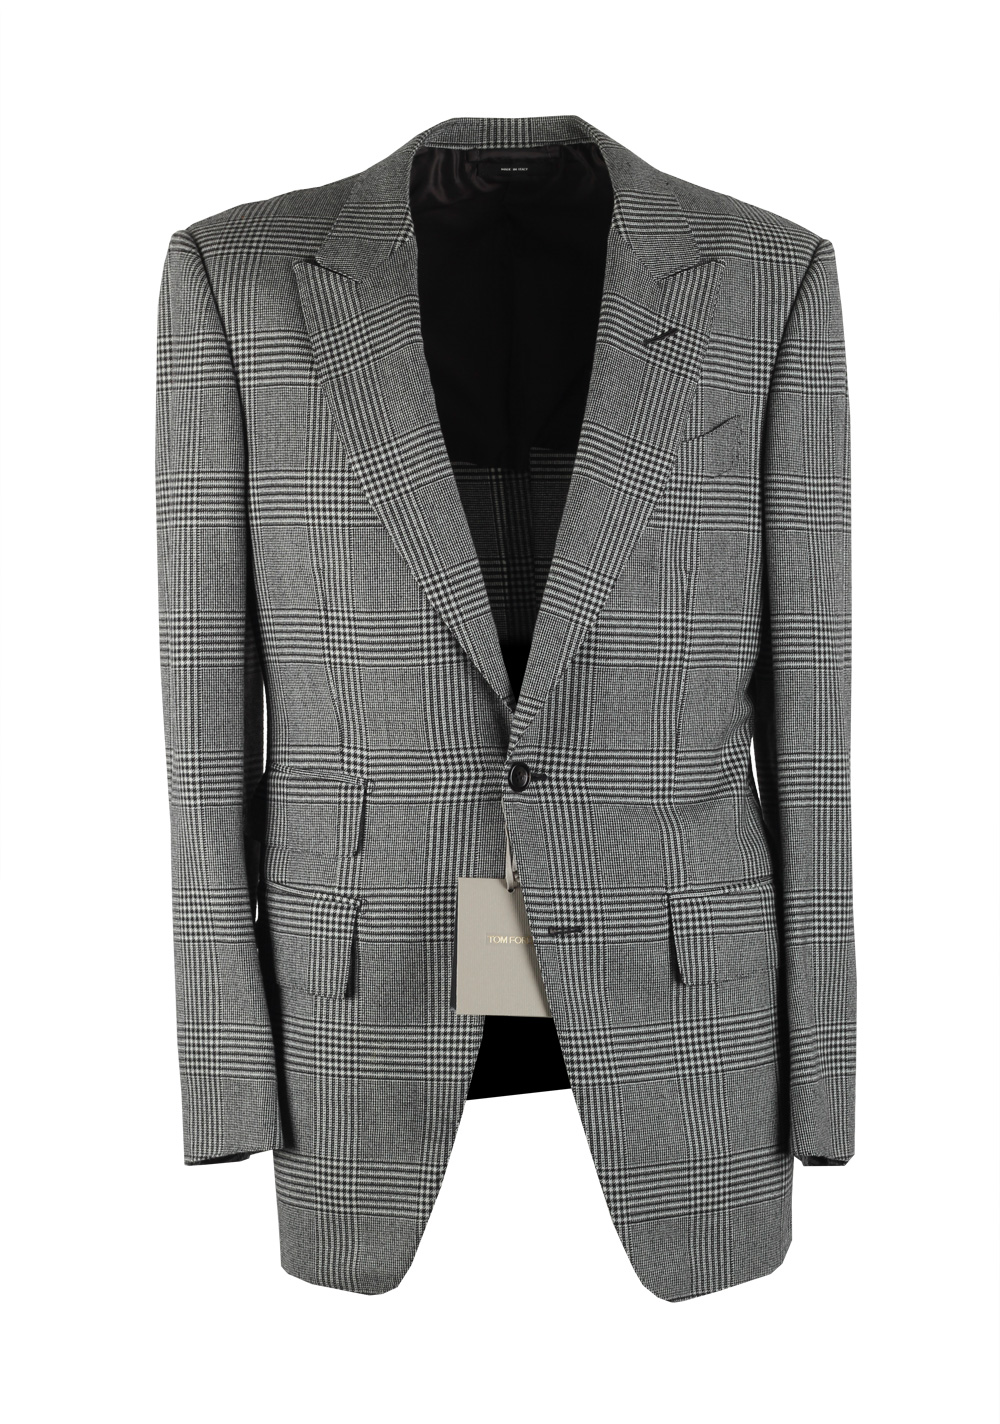 TOM FORD Shelton Gray Checked Suit Size 46 / 36R U.S. | Costume Limité